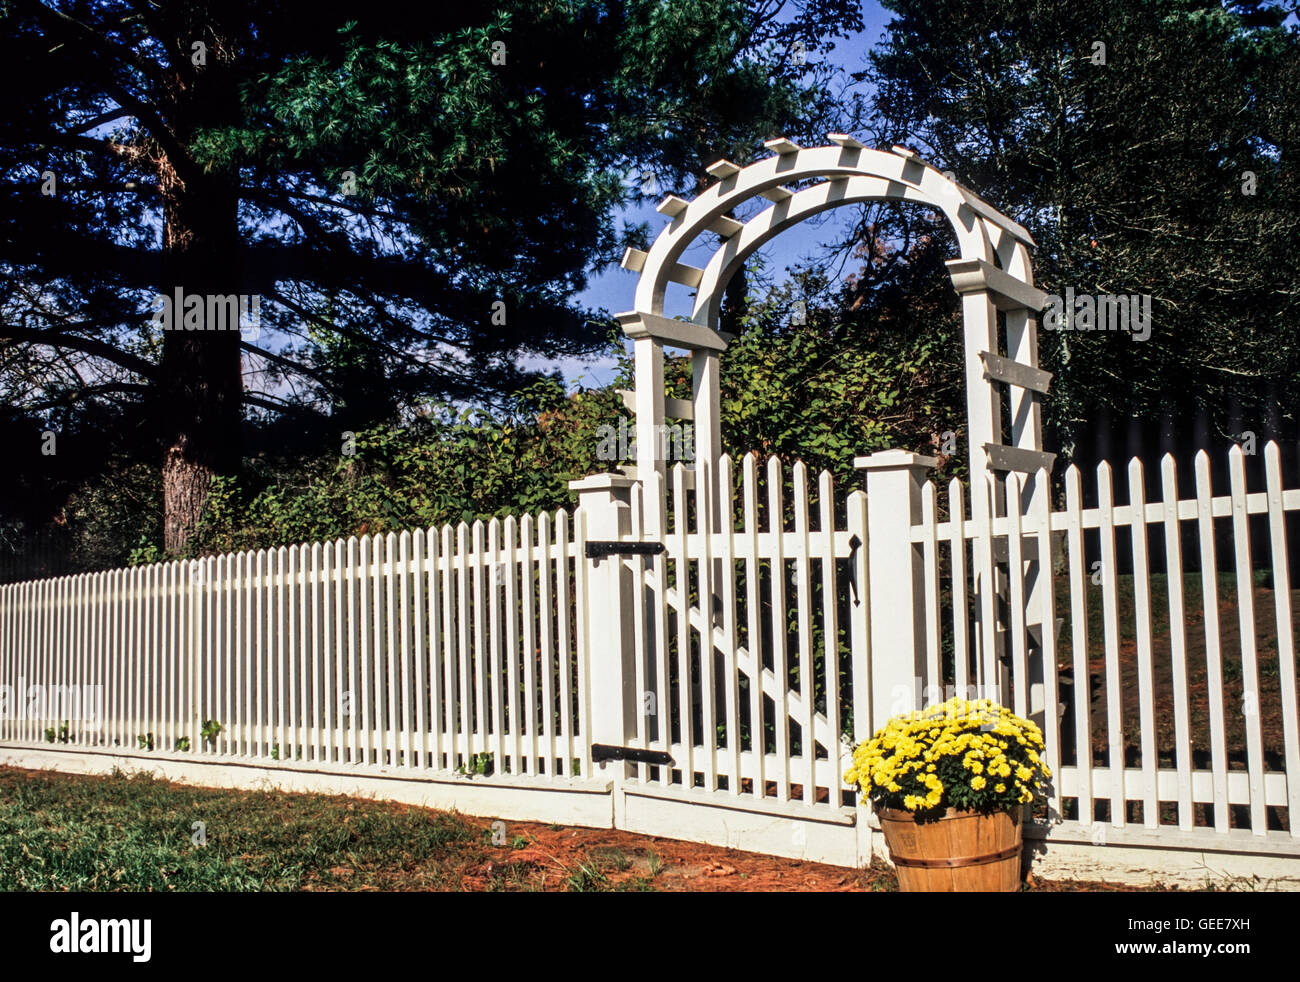 White Picket fence, arbor and chrysanthemums in a basket, Monmouth county, New Jersey, USA, garden gate vine border flowerbed farm entrance, FS10.61mb Stock Photo